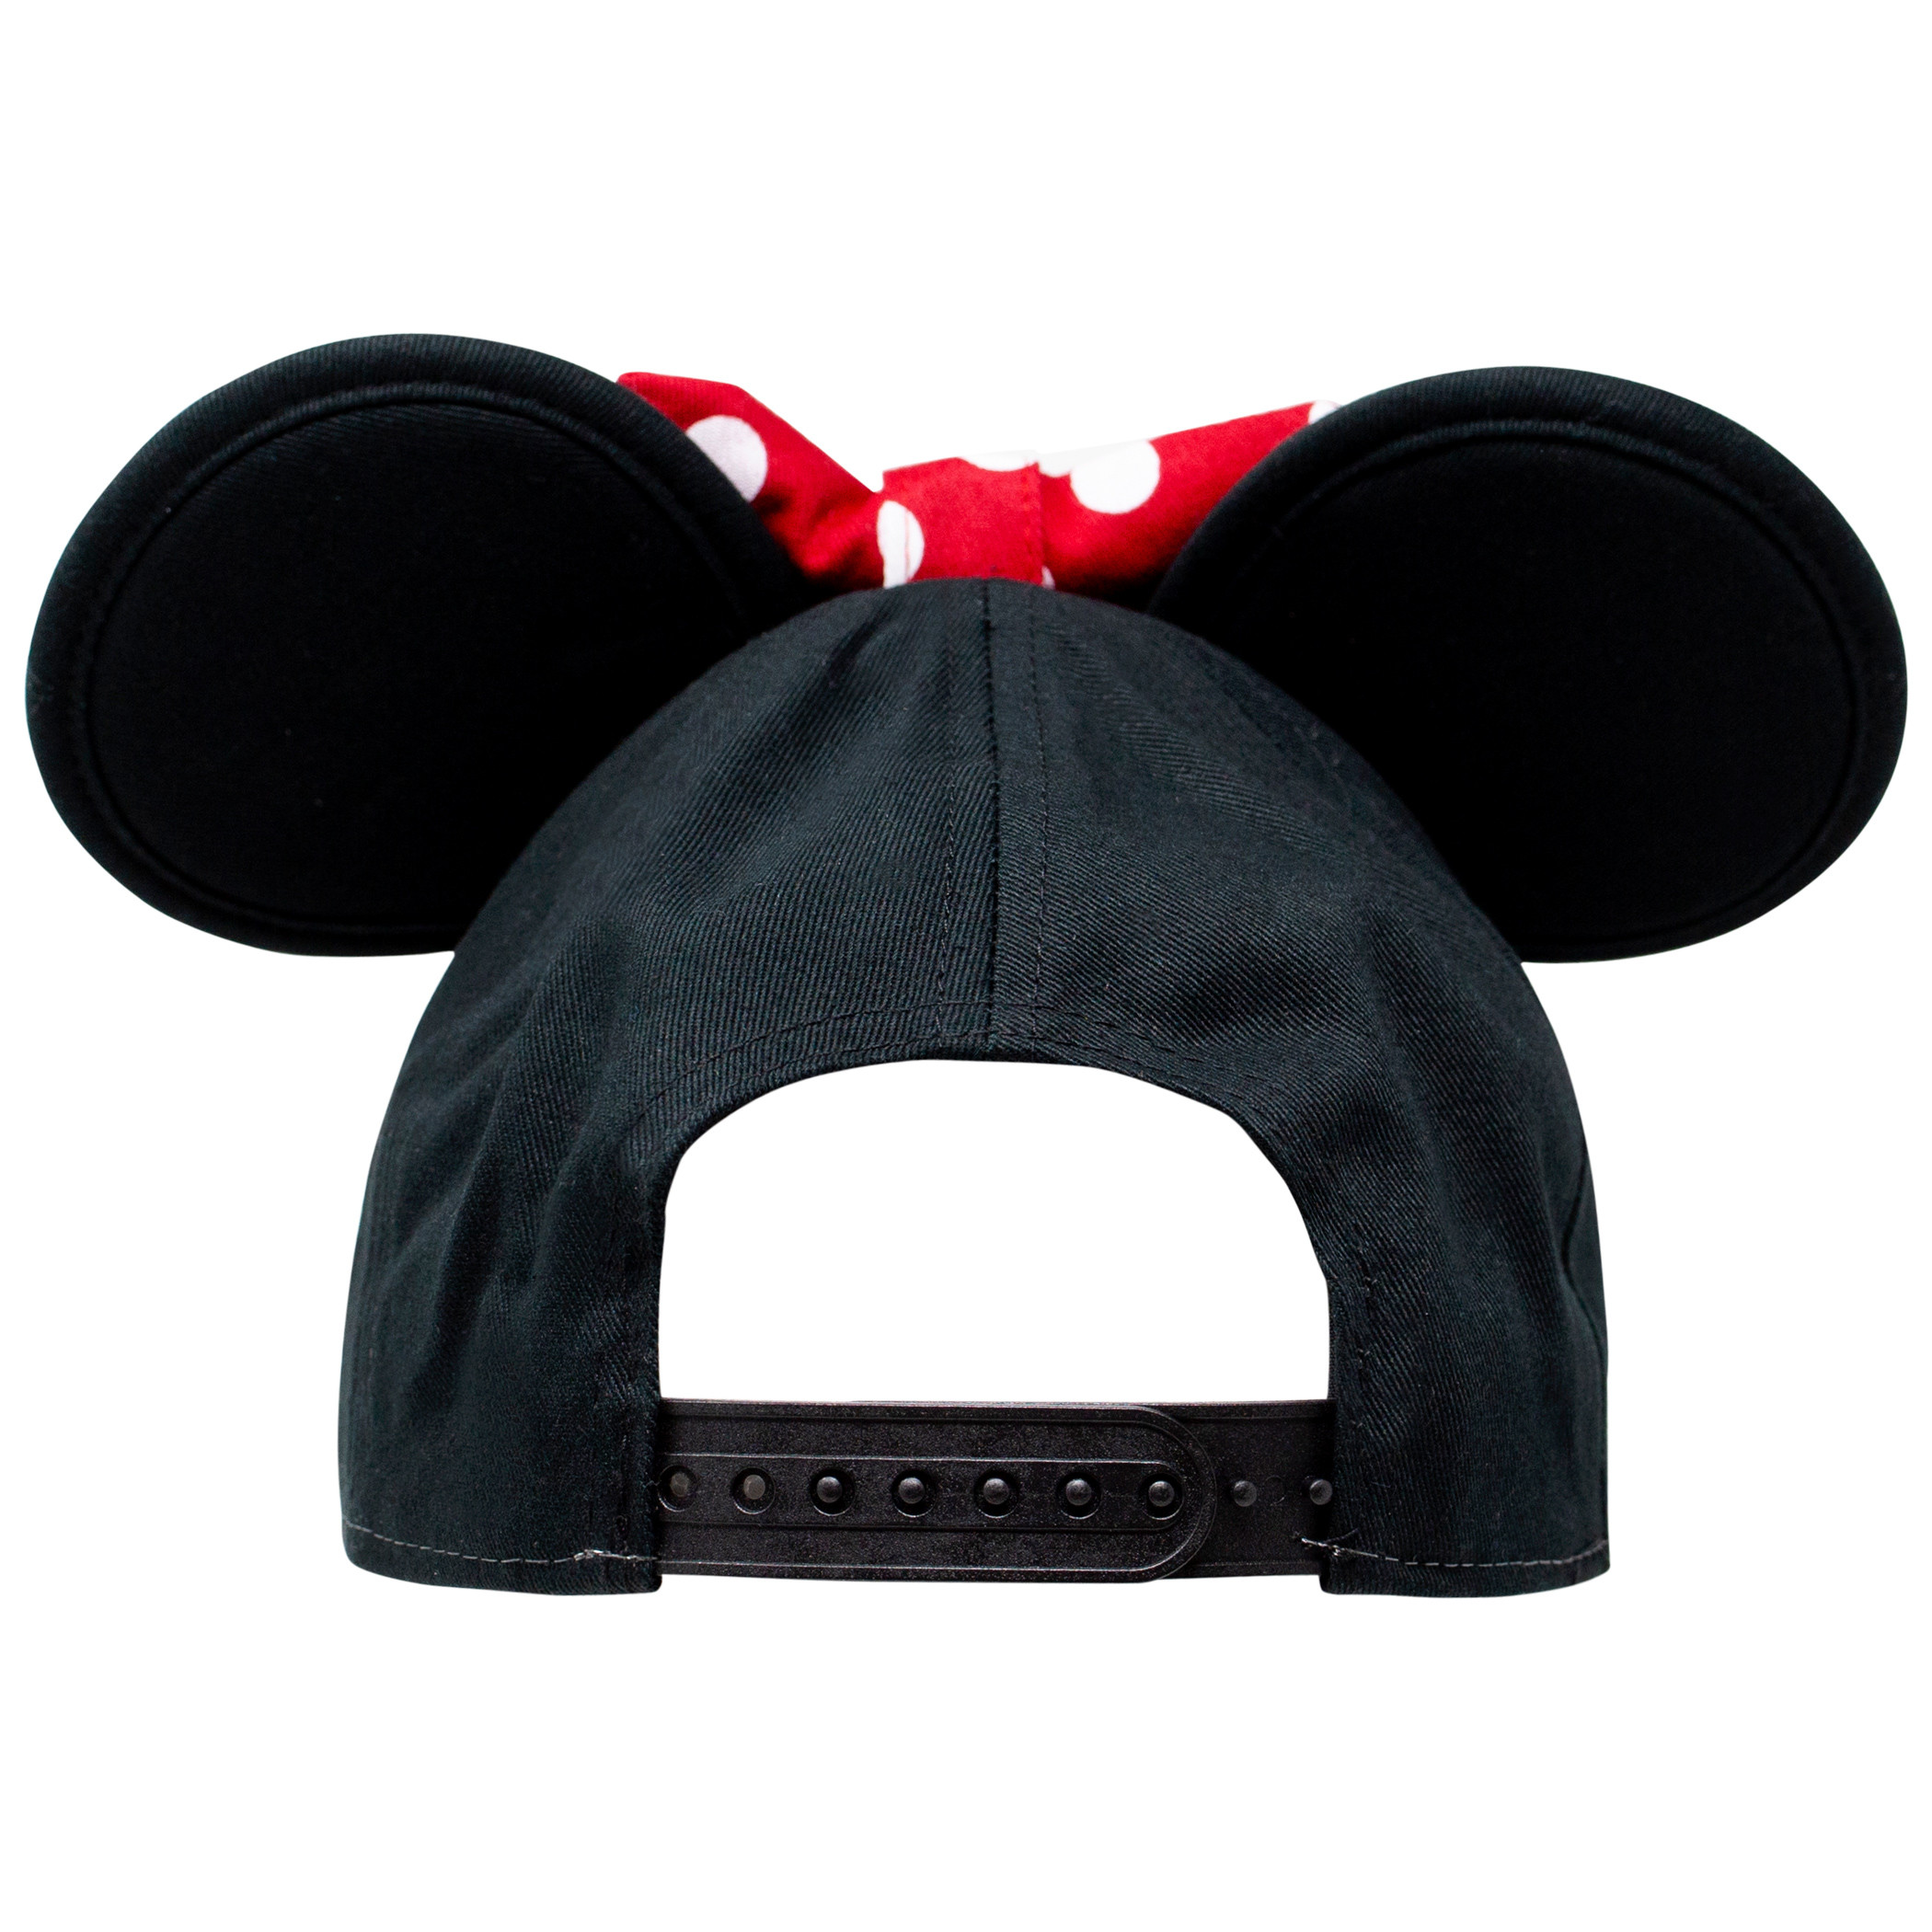 Disney Minnie Mouse Face and Ears Youth Sized Hat